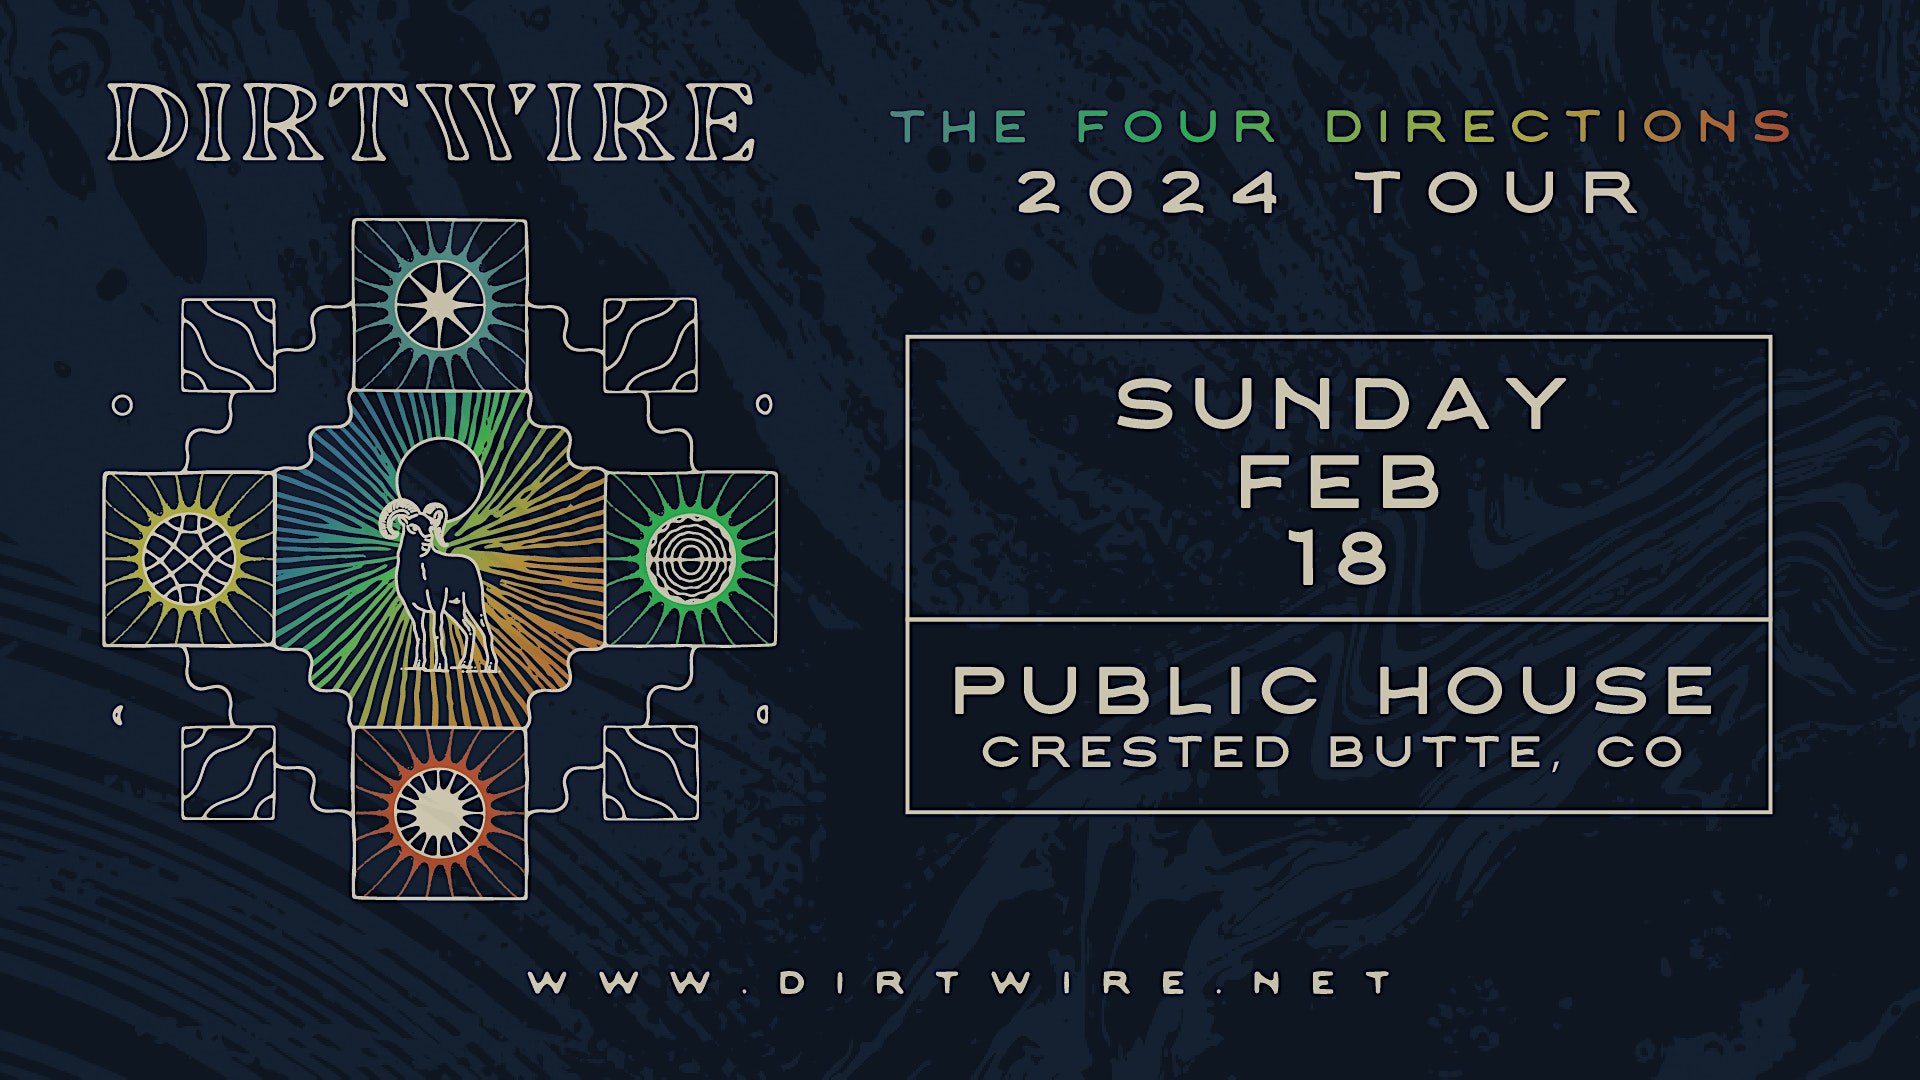 Dirtwire: The Four Directions Tour